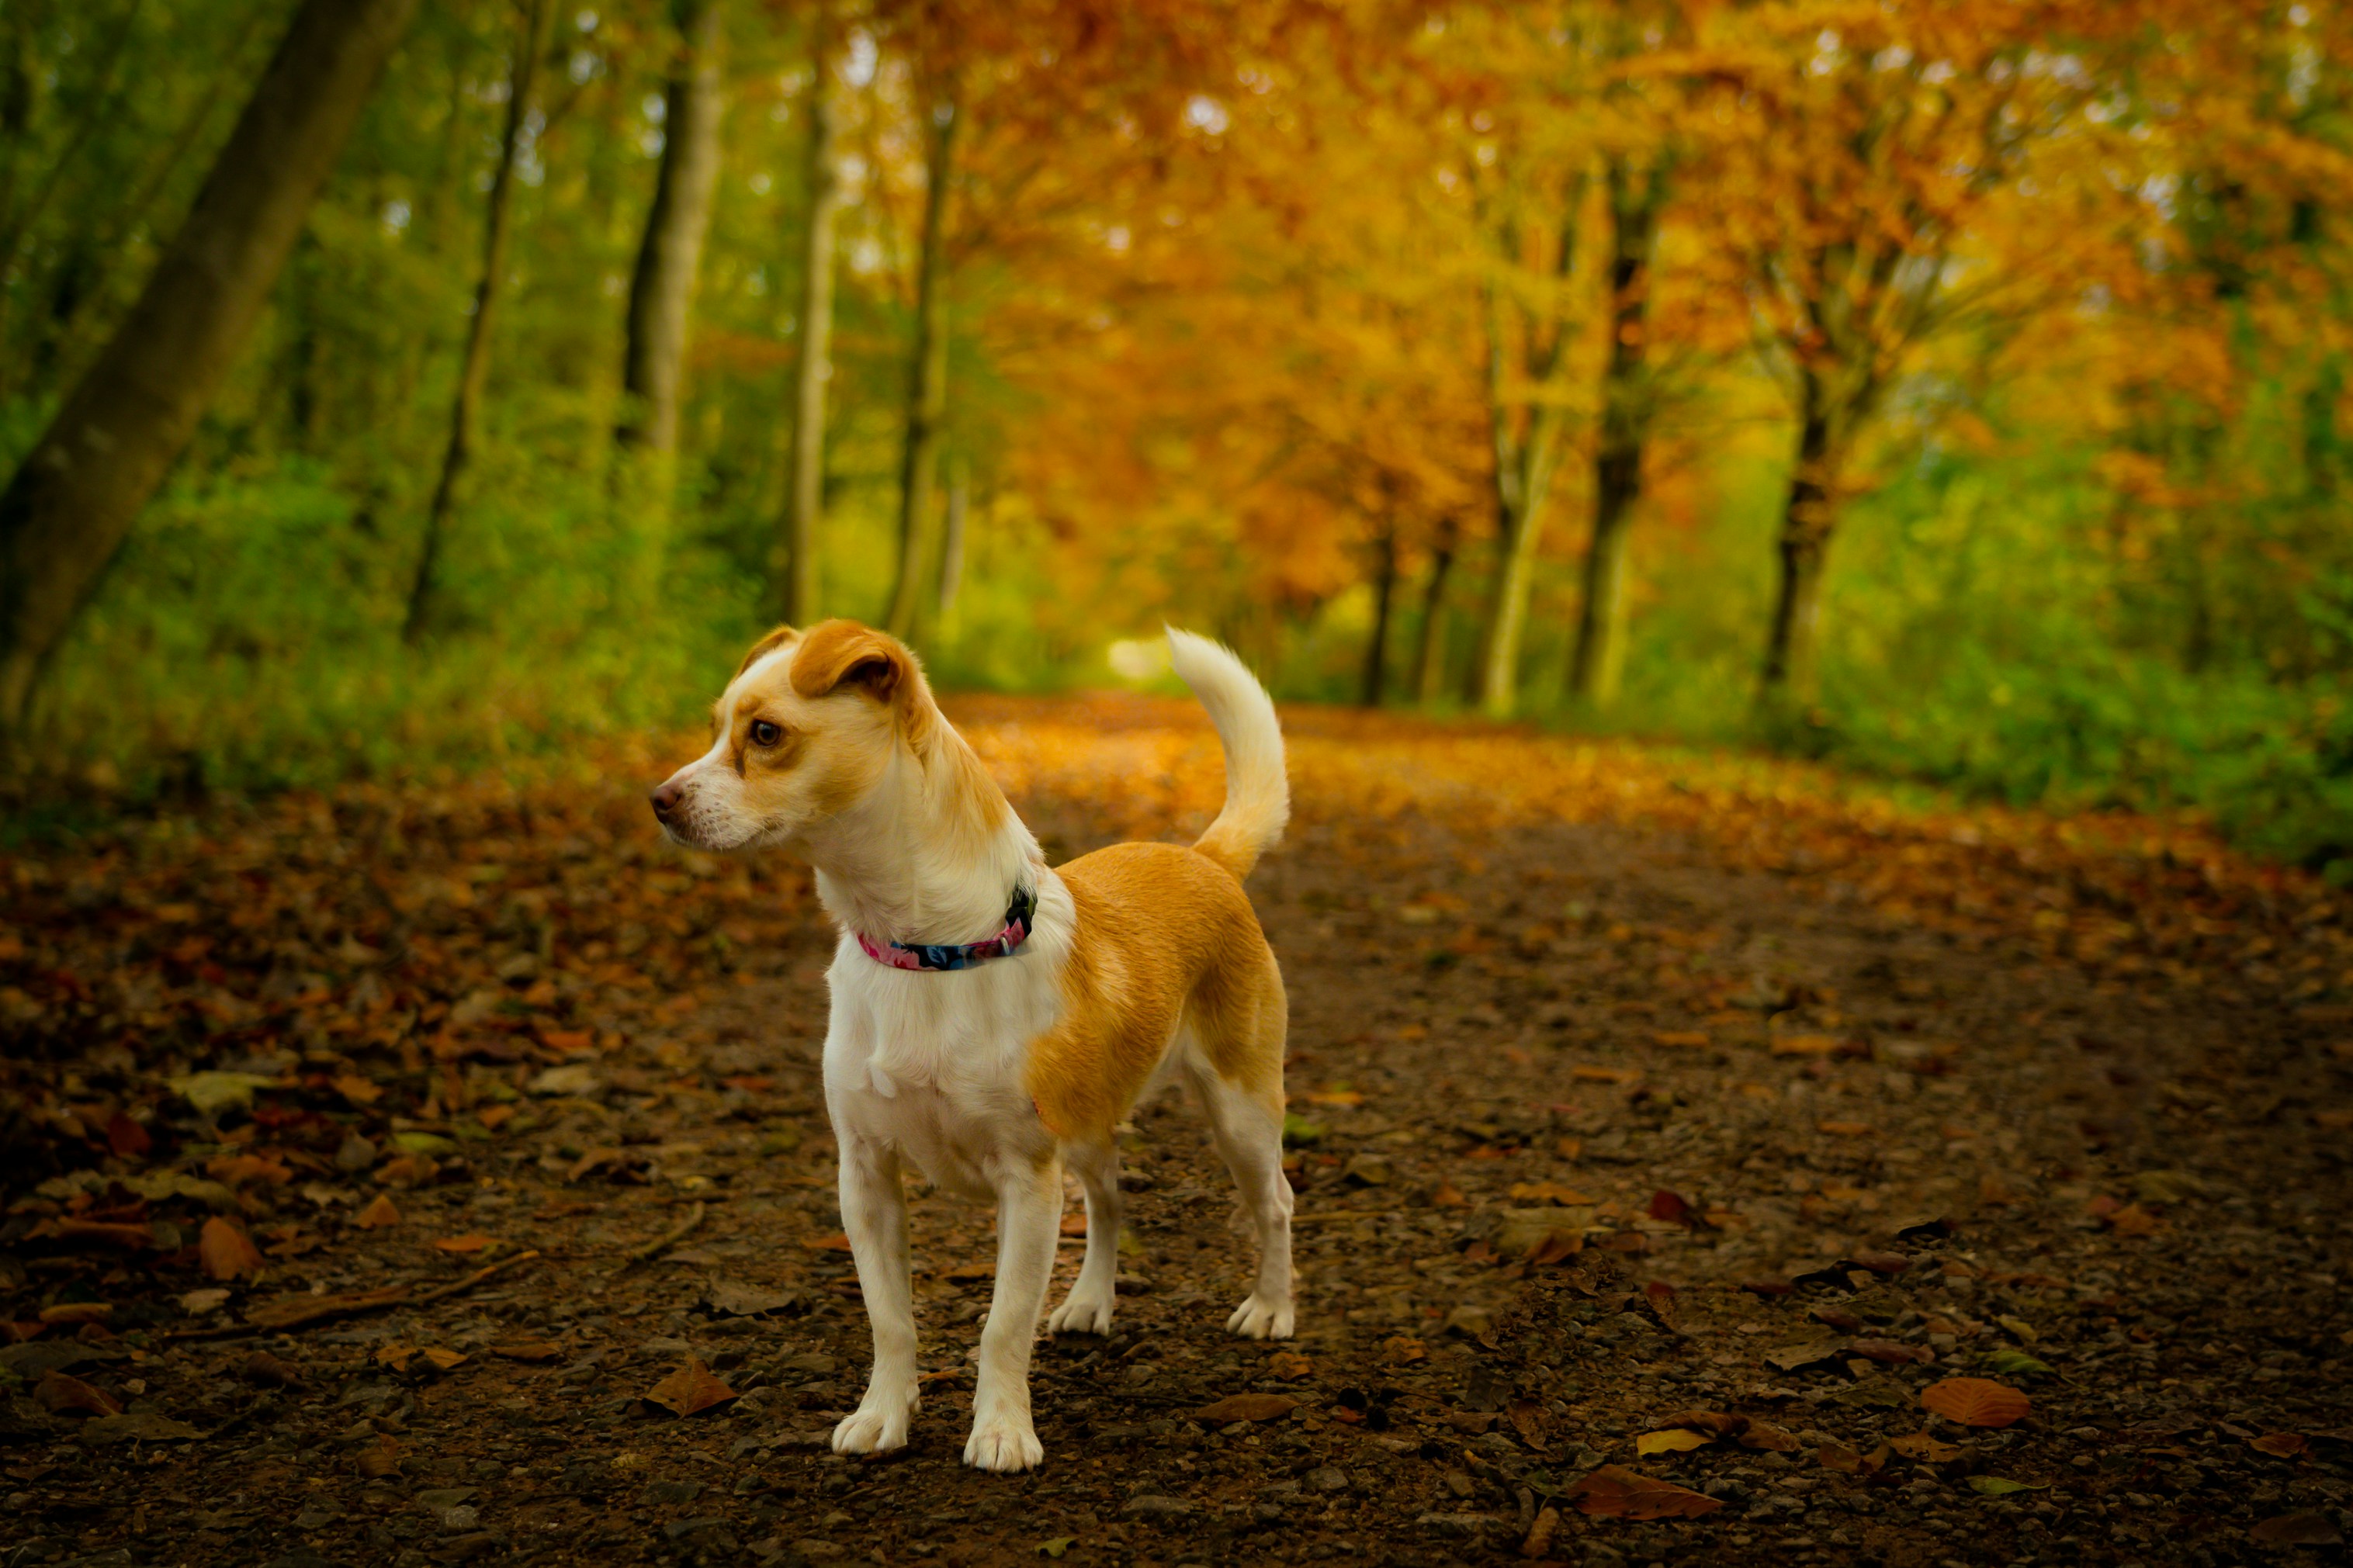 A JackChi rescue dog, blending with the colours of Autumn.